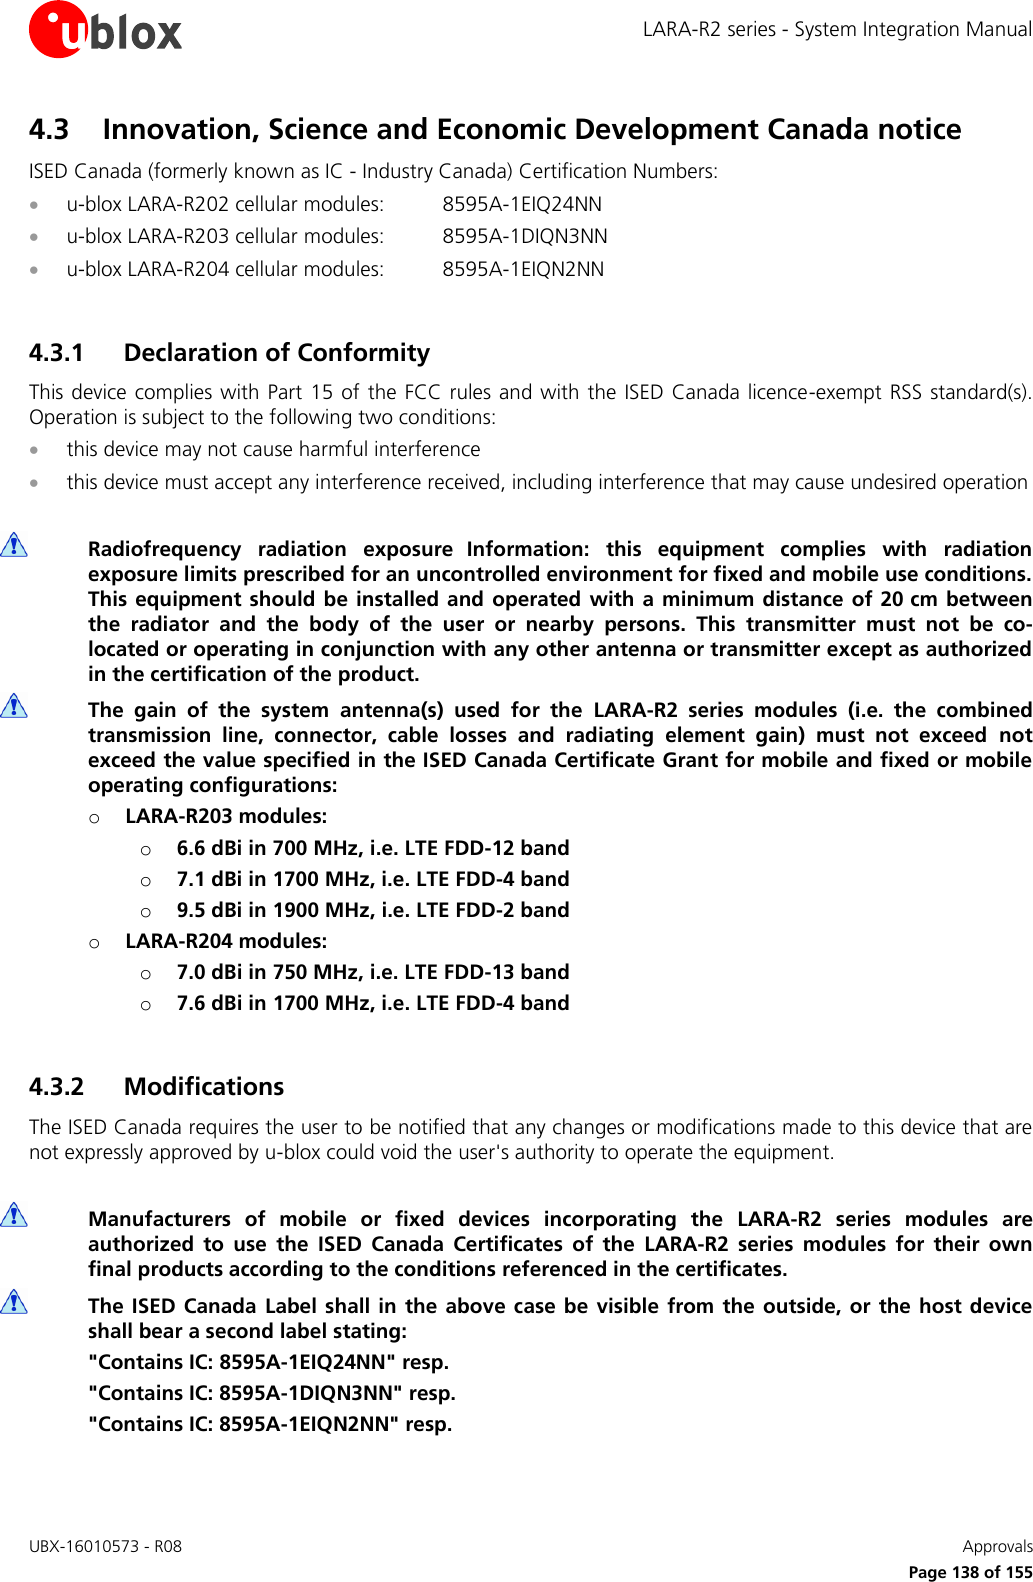 LARA-R2 series - System Integration Manual UBX-16010573 - R08    Approvals     Page 138 of 155 4.3 Innovation, Science and Economic Development Canada notice ISED Canada (formerly known as IC - Industry Canada) Certification Numbers:  u-blox LARA-R202 cellular modules:  8595A-1EIQ24NN  u-blox LARA-R203 cellular modules:  8595A-1DIQN3NN  u-blox LARA-R204 cellular modules:  8595A-1EIQN2NN  4.3.1 Declaration of Conformity  This device  complies  with Part 15  of the FCC rules and  with the ISED  Canada licence-exempt RSS standard(s). Operation is subject to the following two conditions:  this device may not cause harmful interference  this device must accept any interference received, including interference that may cause undesired operation   Radiofrequency  radiation  exposure Information:  this  equipment  complies  with  radiation exposure limits prescribed for an uncontrolled environment for fixed and mobile use conditions. This equipment should be installed and operated with a  minimum distance of 20 cm between the  radiator  and  the  body  of  the  user  or  nearby  persons.  This  transmitter  must  not  be  co-located or operating in conjunction with any other antenna or transmitter except as authorized in the certification of the product.  The  gain  of  the  system  antenna(s)  used  for  the  LARA-R2  series  modules  (i.e.  the  combined transmission  line,  connector,  cable  losses  and  radiating  element  gain)  must  not  exceed  not exceed the value specified in the ISED Canada Certificate Grant for mobile and fixed or mobile operating configurations: o LARA-R203 modules: o 6.6 dBi in 700 MHz, i.e. LTE FDD-12 band  o 7.1 dBi in 1700 MHz, i.e. LTE FDD-4 band o 9.5 dBi in 1900 MHz, i.e. LTE FDD-2 band o LARA-R204 modules: o 7.0 dBi in 750 MHz, i.e. LTE FDD-13 band  o 7.6 dBi in 1700 MHz, i.e. LTE FDD-4 band  4.3.2 Modifications The ISED Canada requires the user to be notified that any changes or modifications made to this device that are not expressly approved by u-blox could void the user&apos;s authority to operate the equipment.   Manufacturers  of  mobile  or  fixed  devices  incorporating  the  LARA-R2  series  modules  are authorized  to  use  the  ISED  Canada  Certificates  of  the  LARA-R2  series  modules  for  their  own final products according to the conditions referenced in the certificates.  The ISED Canada Label  shall  in  the  above  case be visible from  the outside, or  the host  device shall bear a second label stating: &quot;Contains IC: 8595A-1EIQ24NN&quot; resp. &quot;Contains IC: 8595A-1DIQN3NN&quot; resp. &quot;Contains IC: 8595A-1EIQN2NN&quot; resp.  